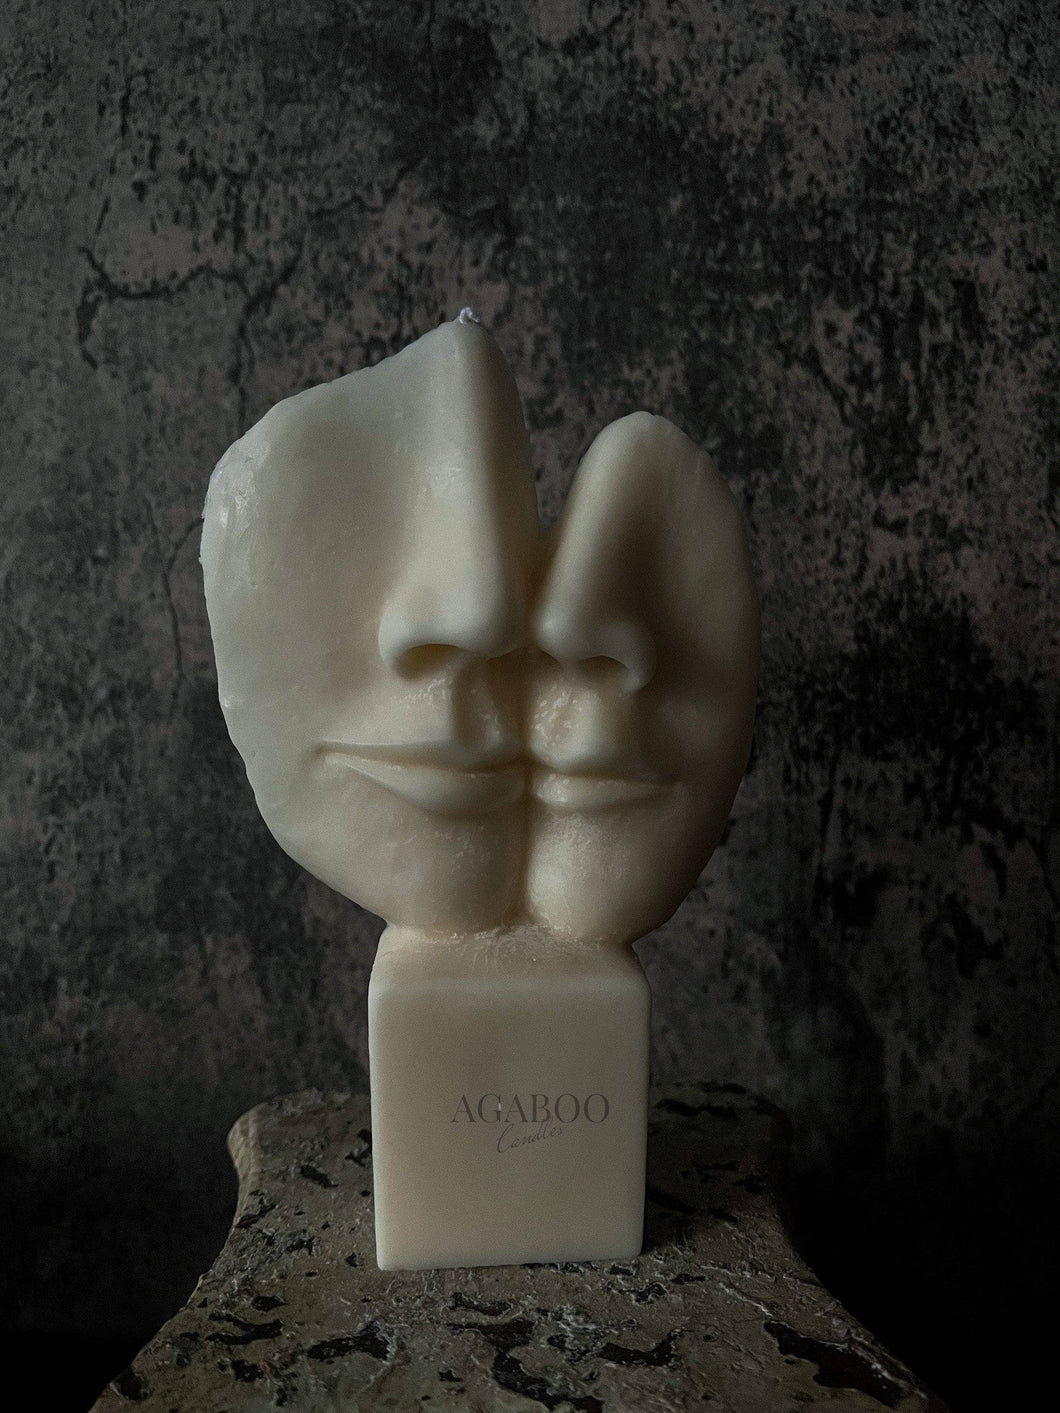 Agaboo Candle - 2 Faces Abstract Candle 7x4in: Clear